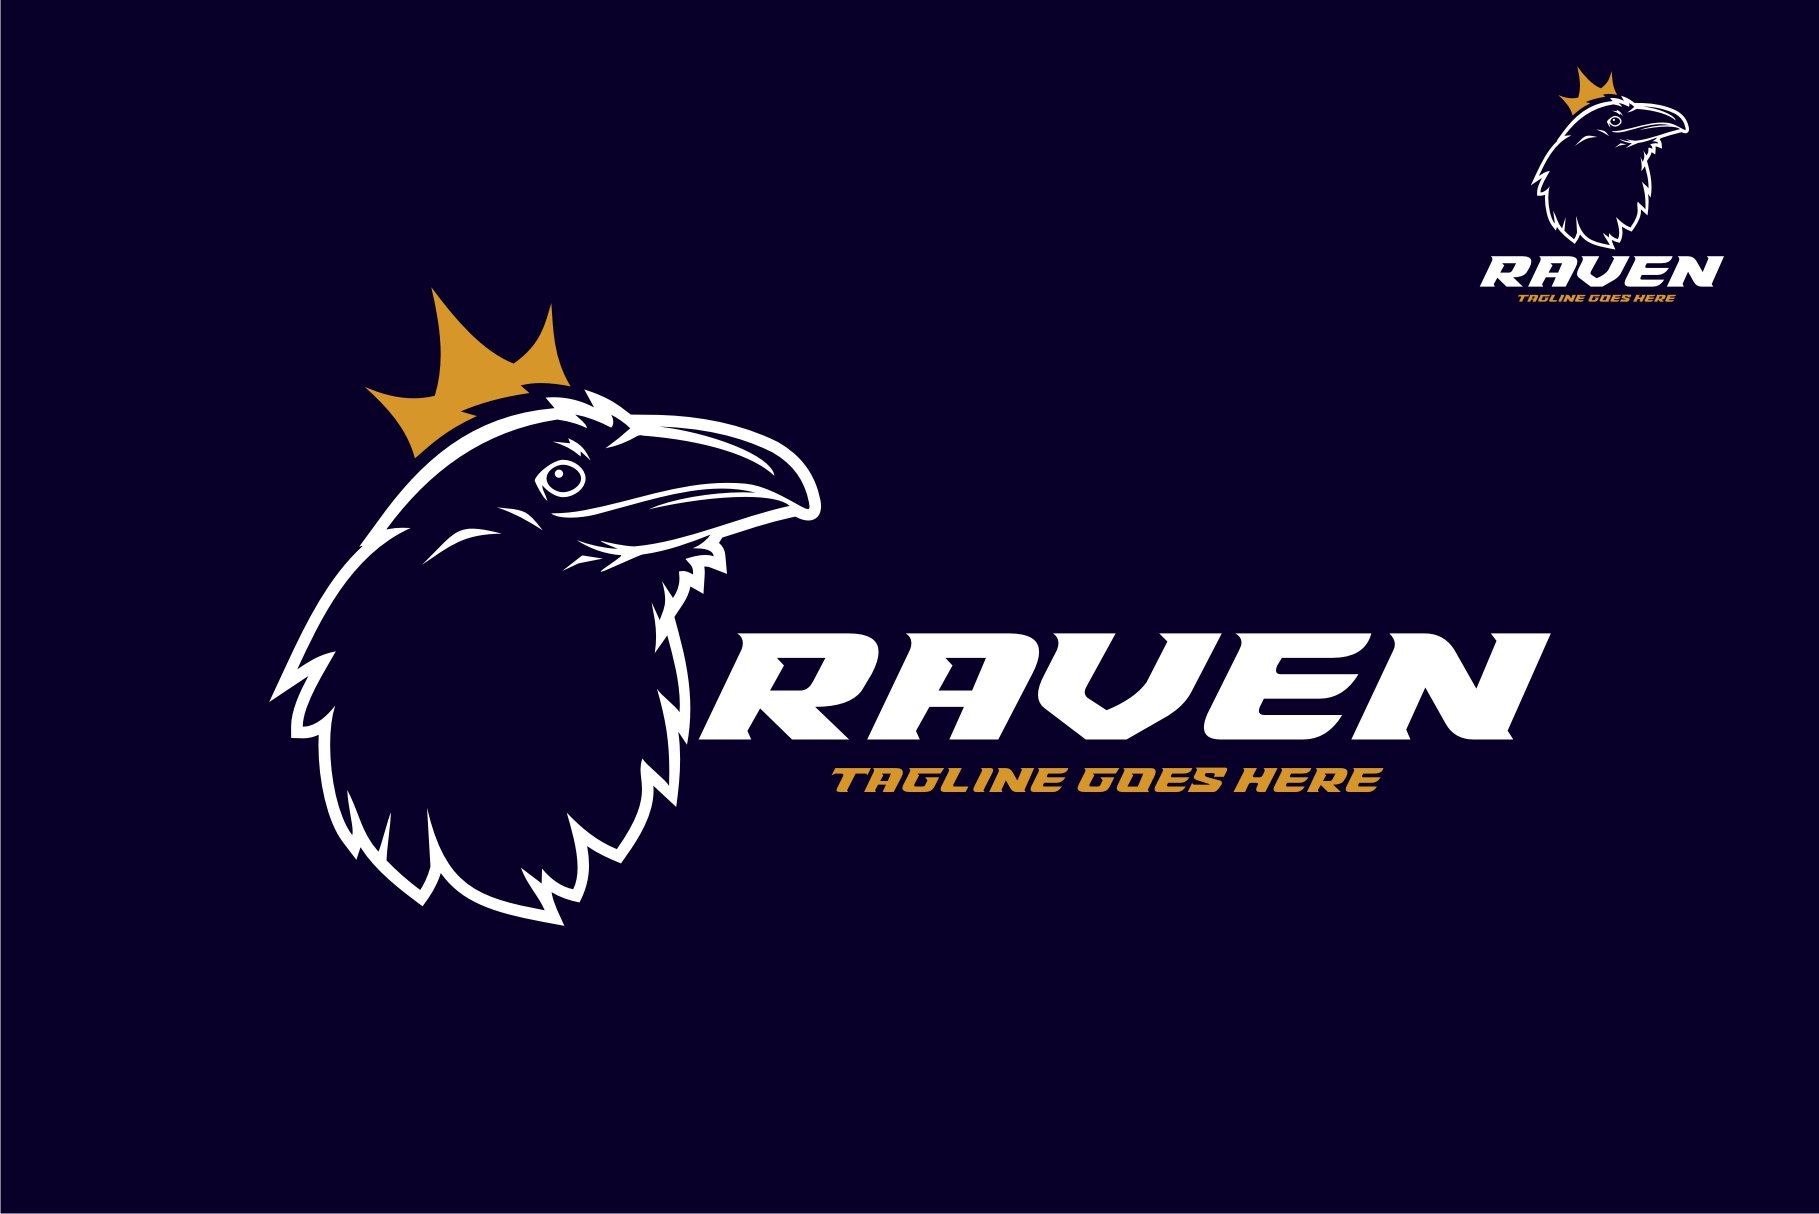 The Raven preview image.